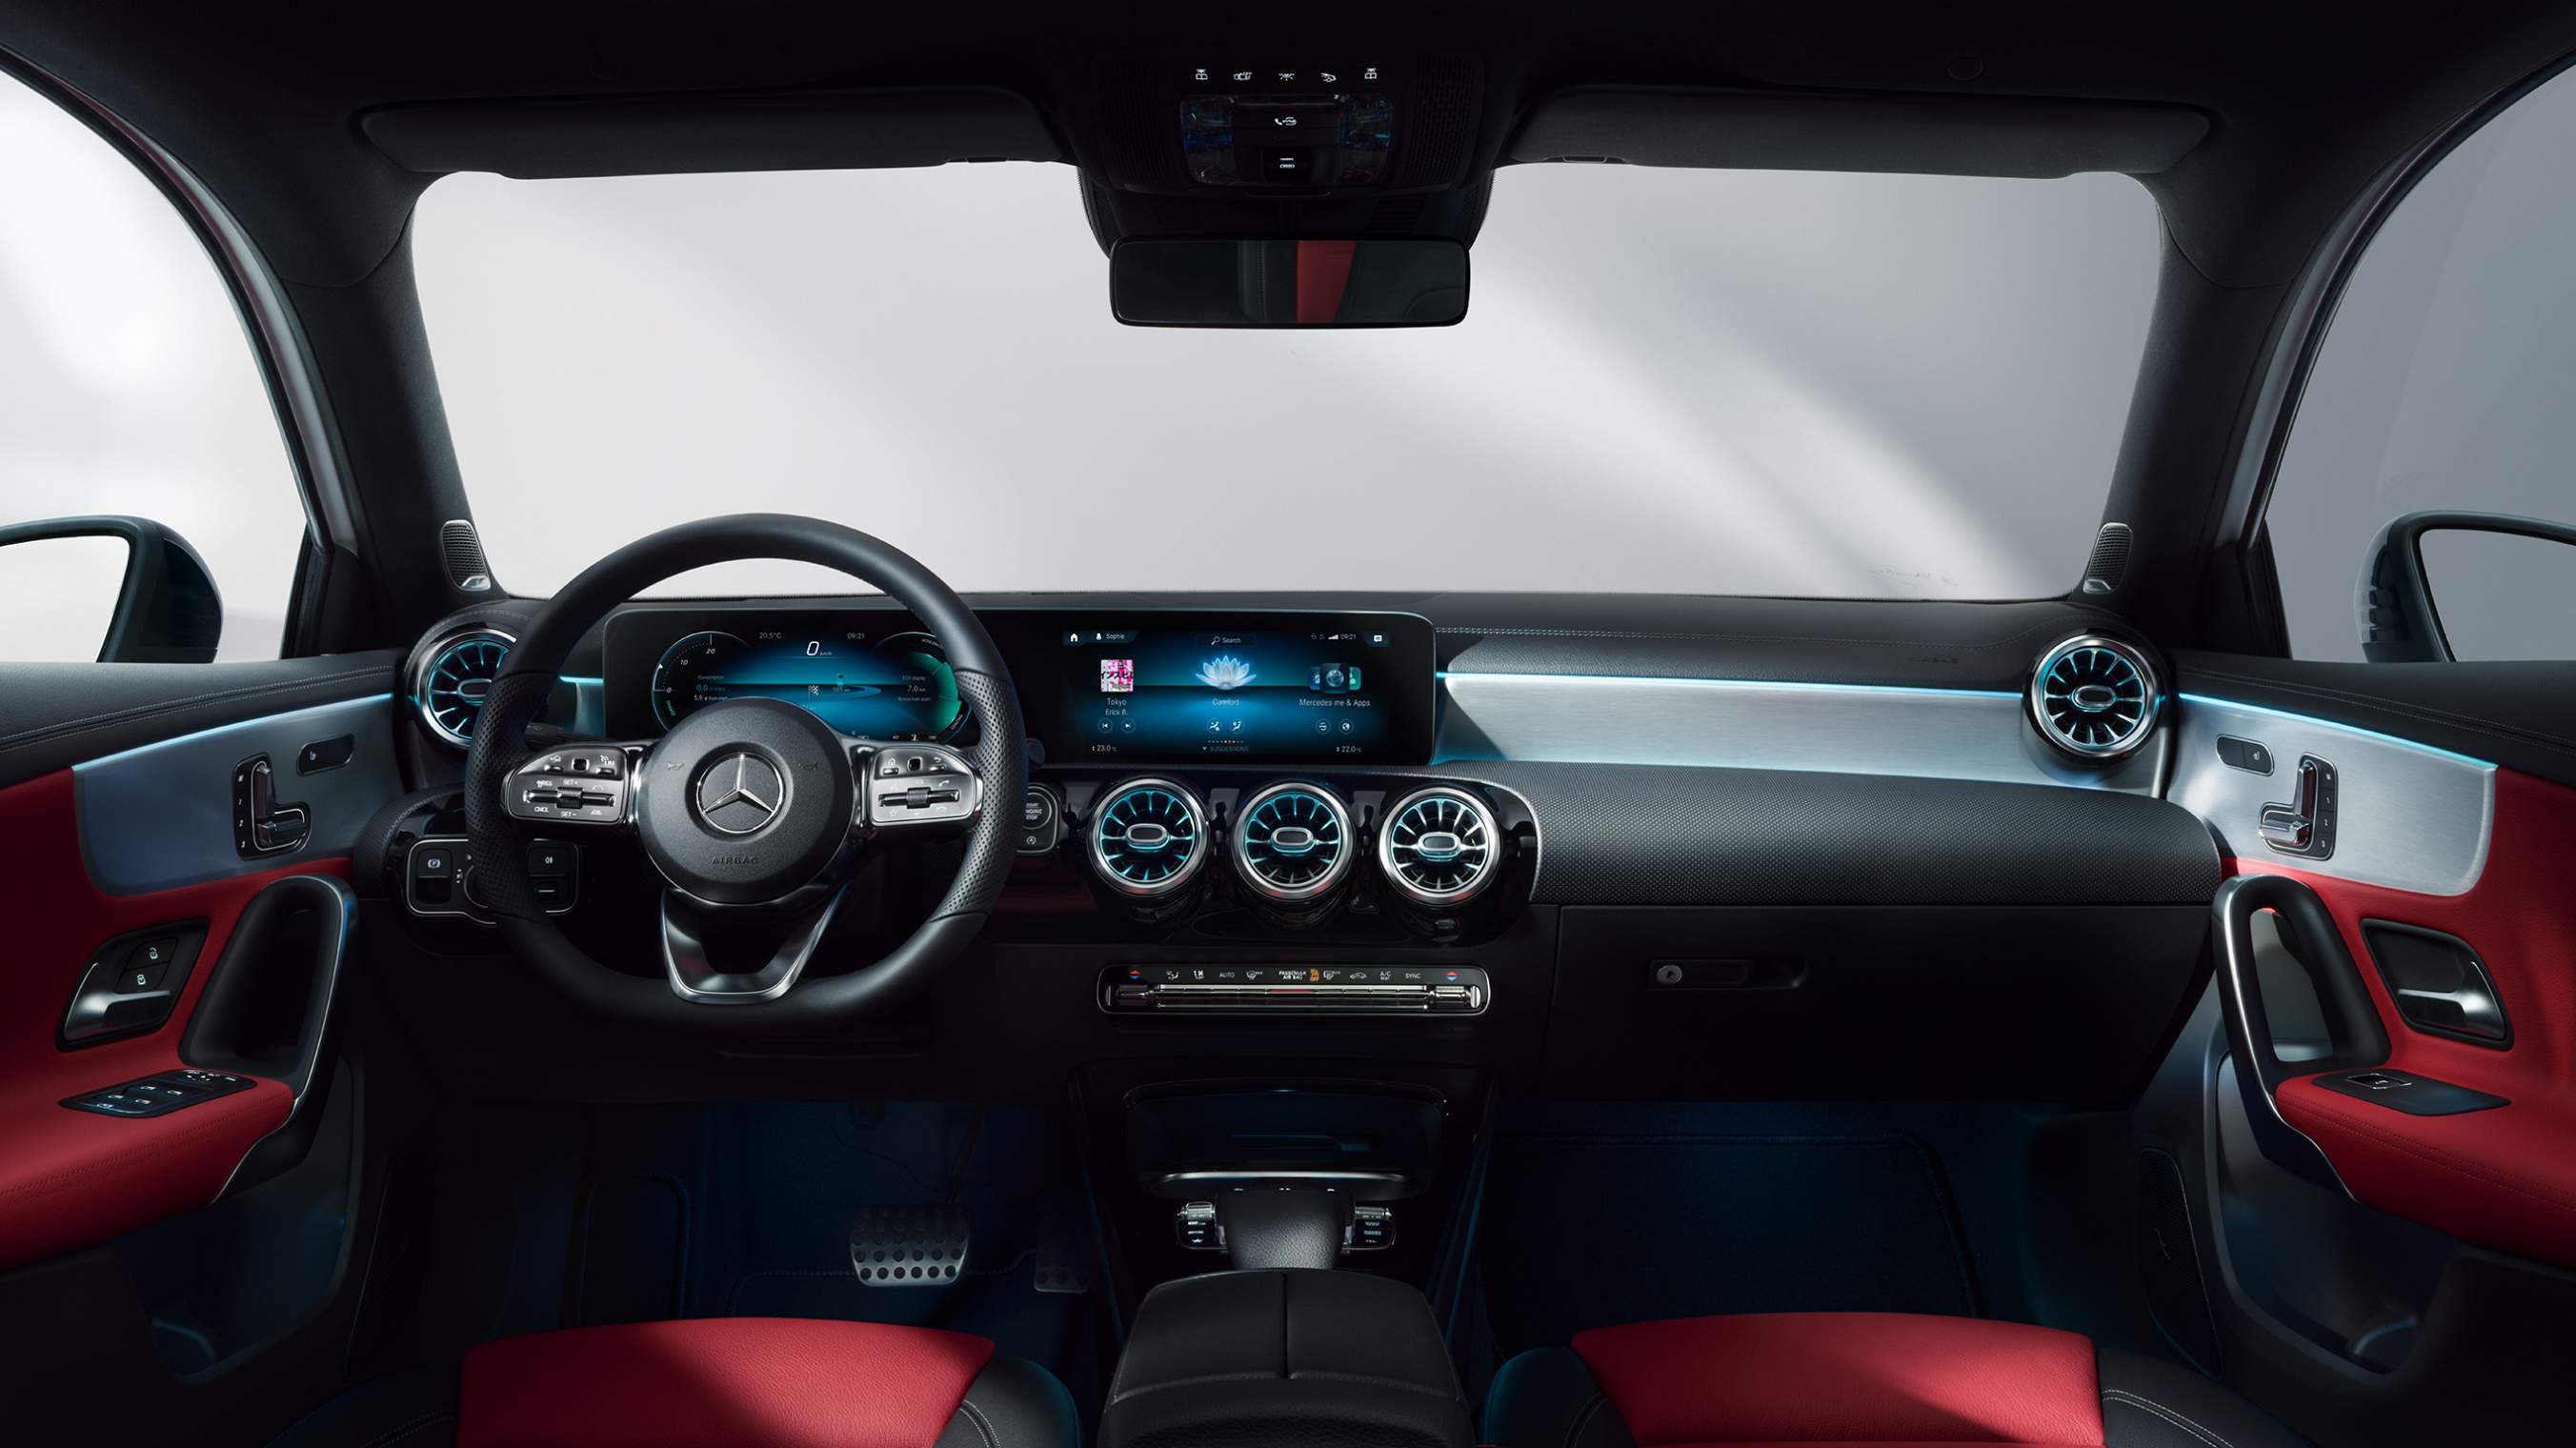 MBUX / Mercedes-Benz User Experience